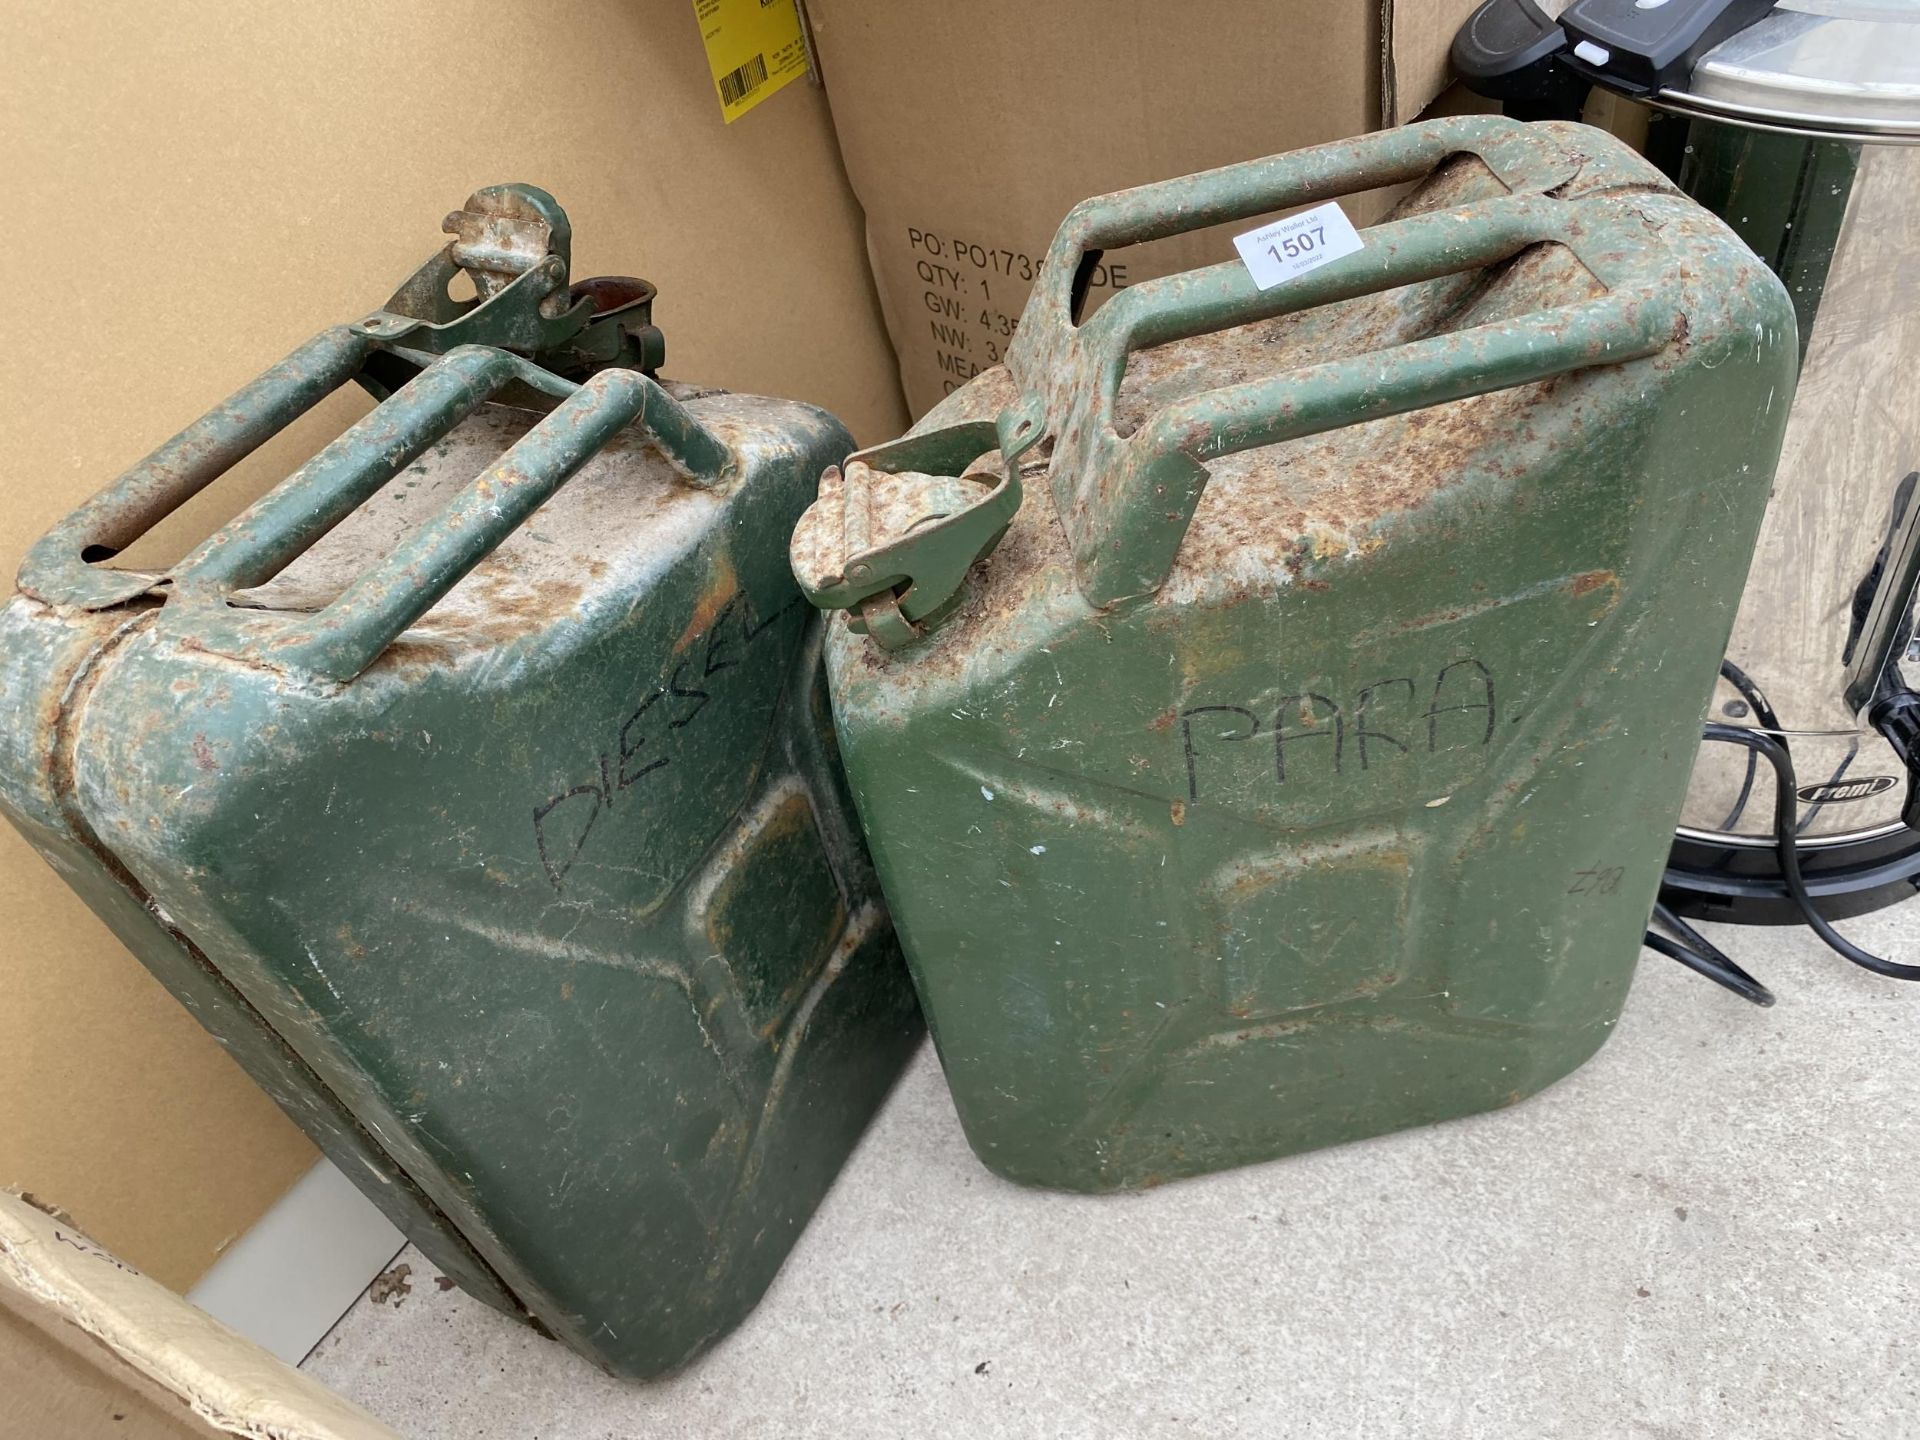 TWO VINTAGE JERRY CANS - Image 2 of 2